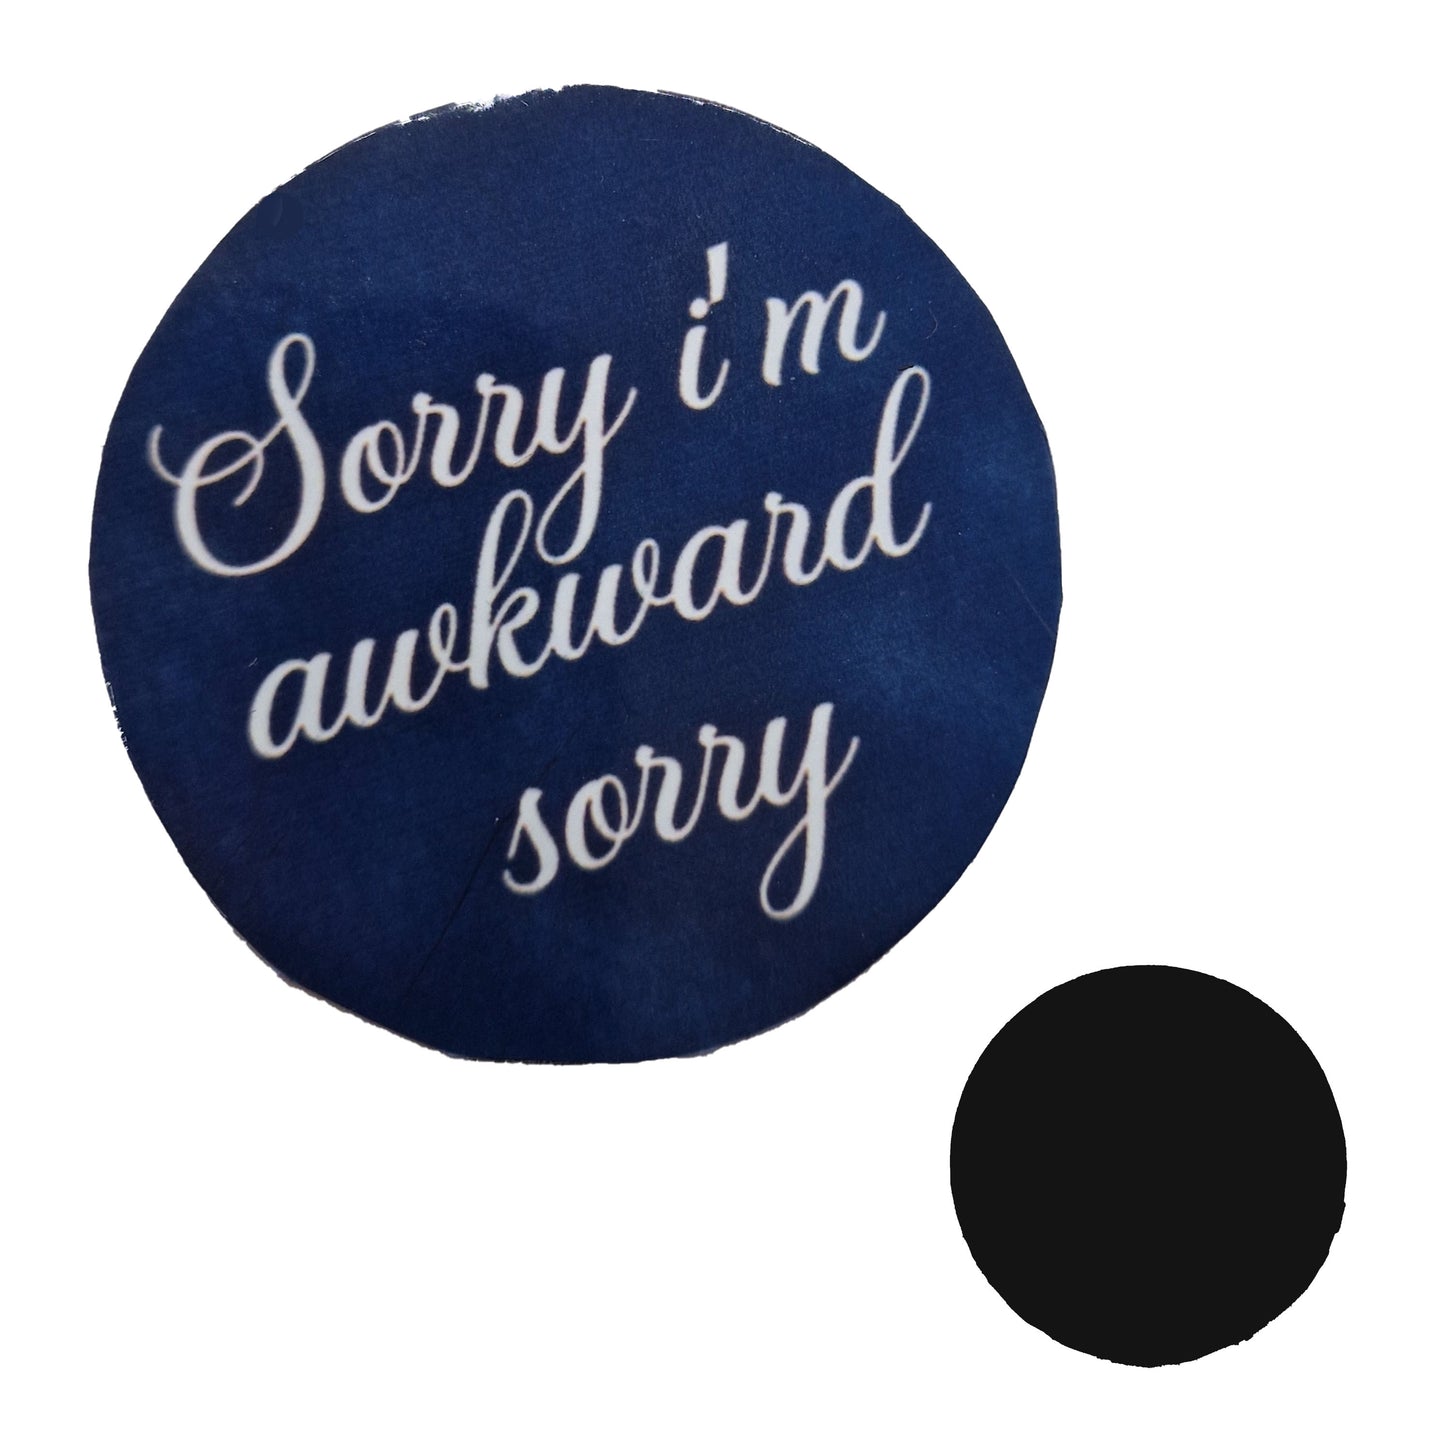 sarcastic gifts for friends sorry im awkward sorry fridge magnet